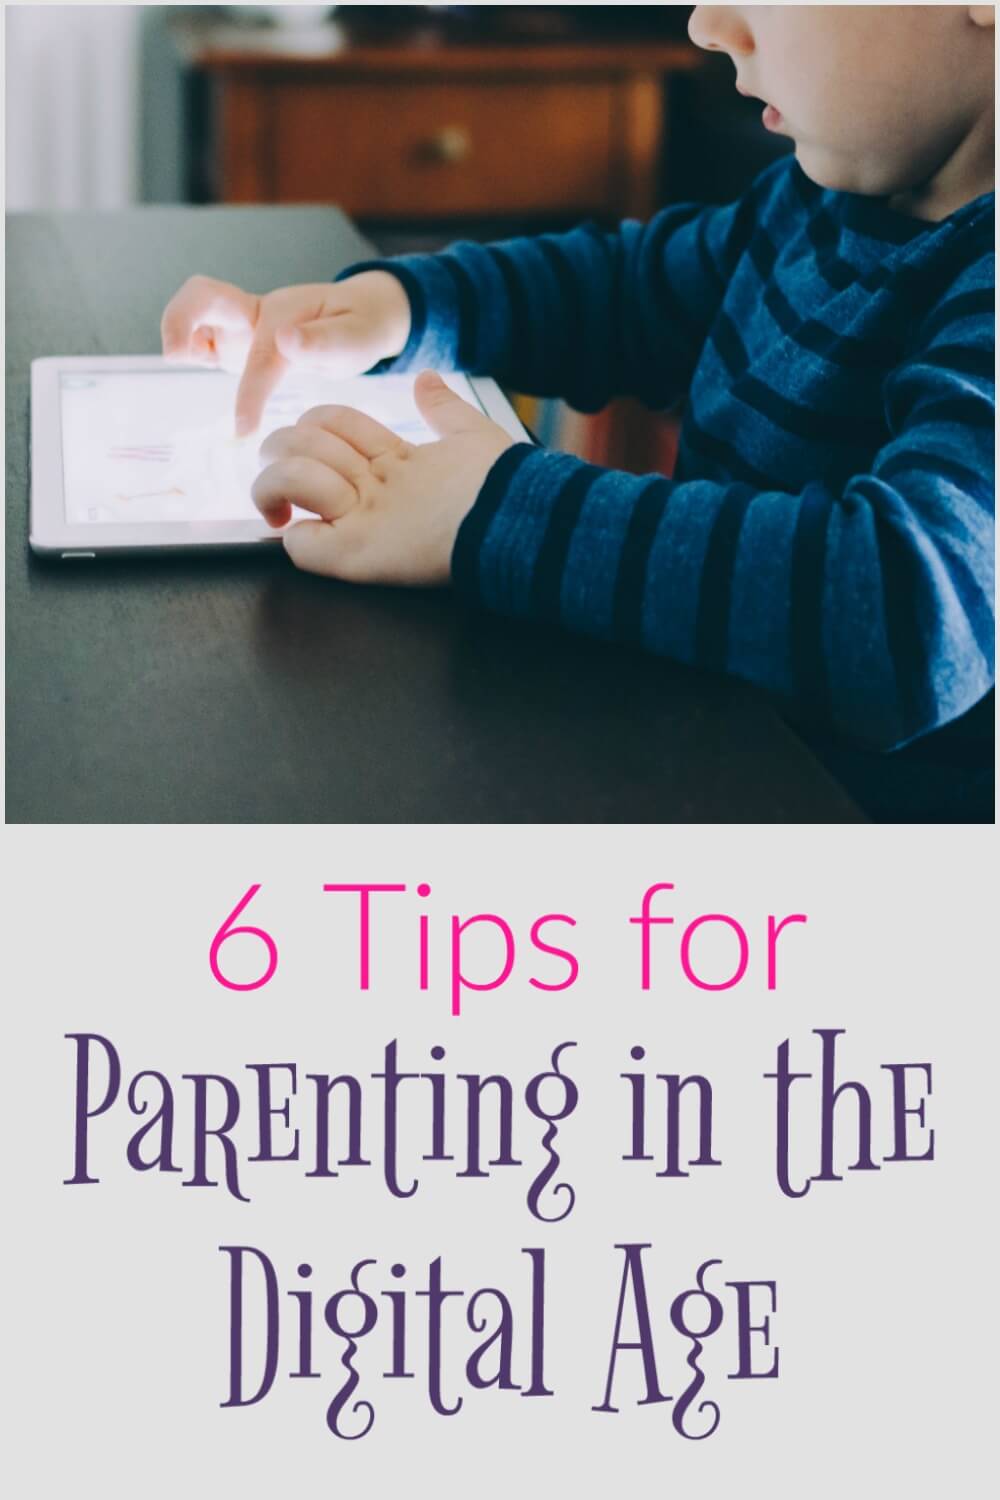 As much as we all enjoy the luxuries the modern age has given us, the internet and the technology are giving headaches to parents around the world. Parenting in the digital age is no walk in the park. 